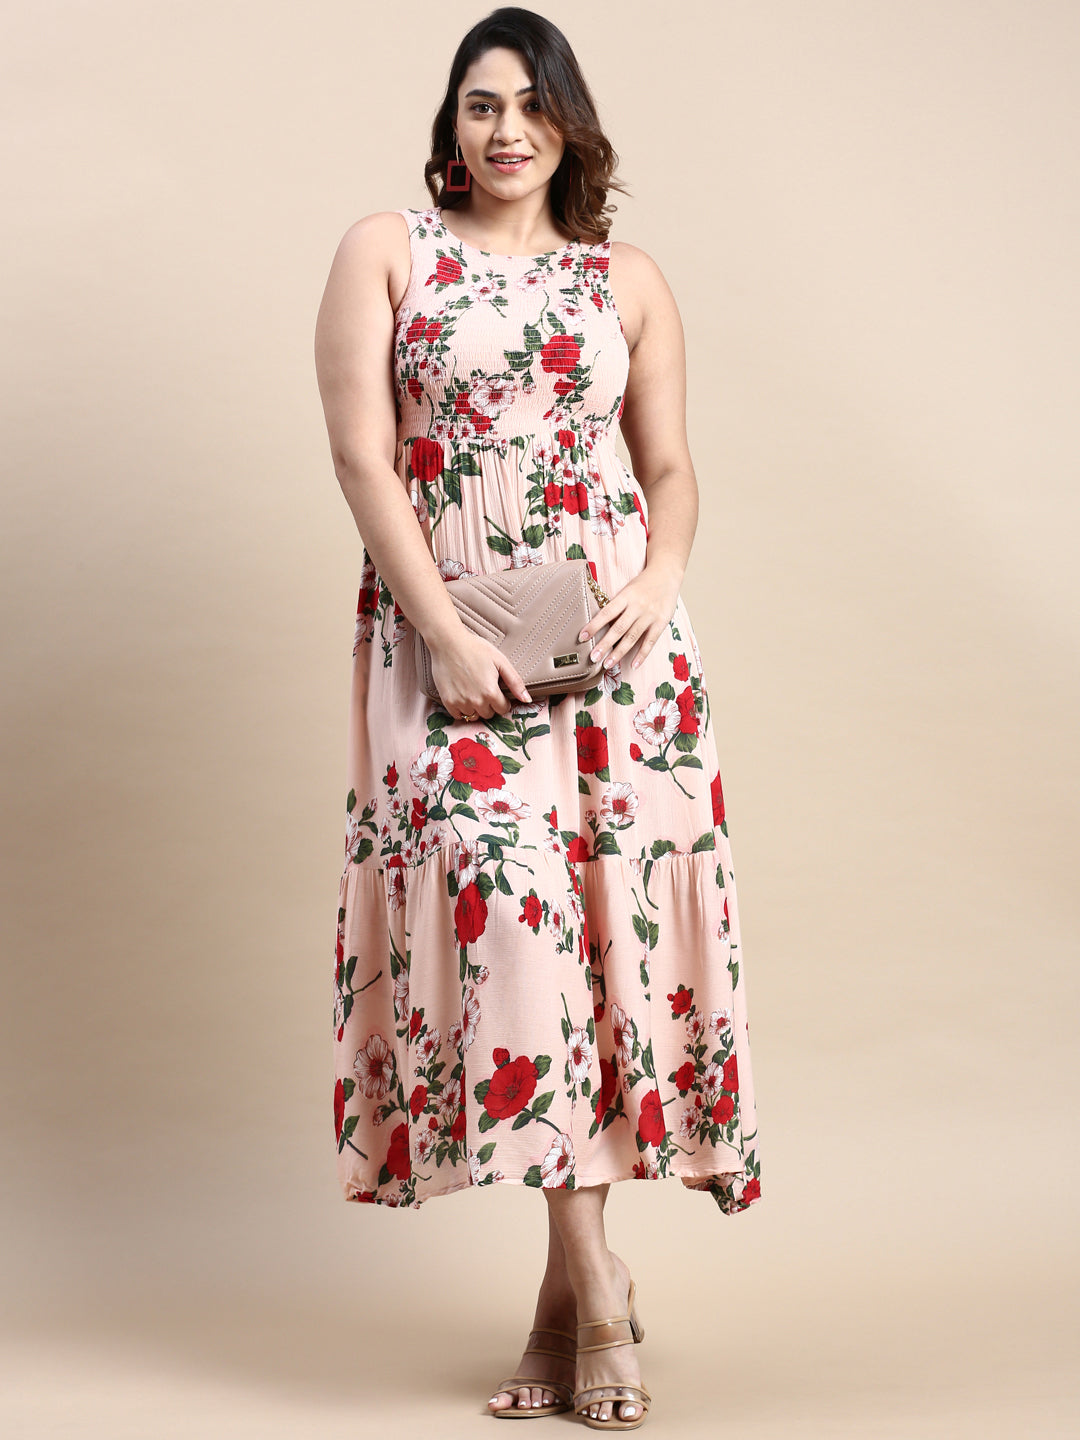 Women Peach Floral Fit and Flare Dress